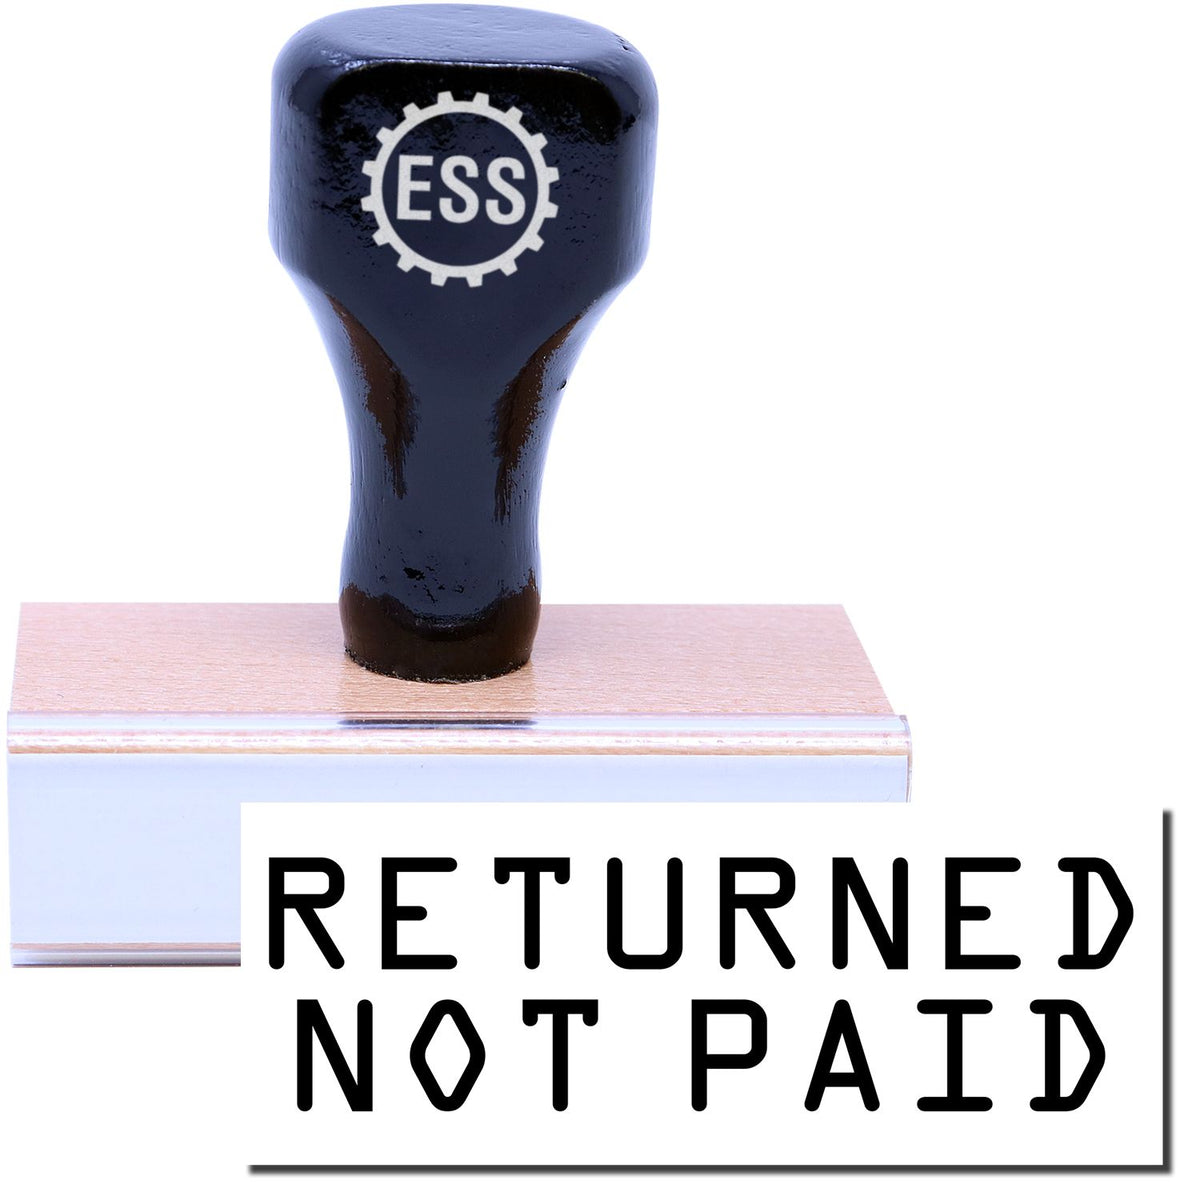 A stock office rubber stamp with a stamped image showing how the text &quot;RETURNED NOT PAID&quot; in a large font is displayed after stamping.